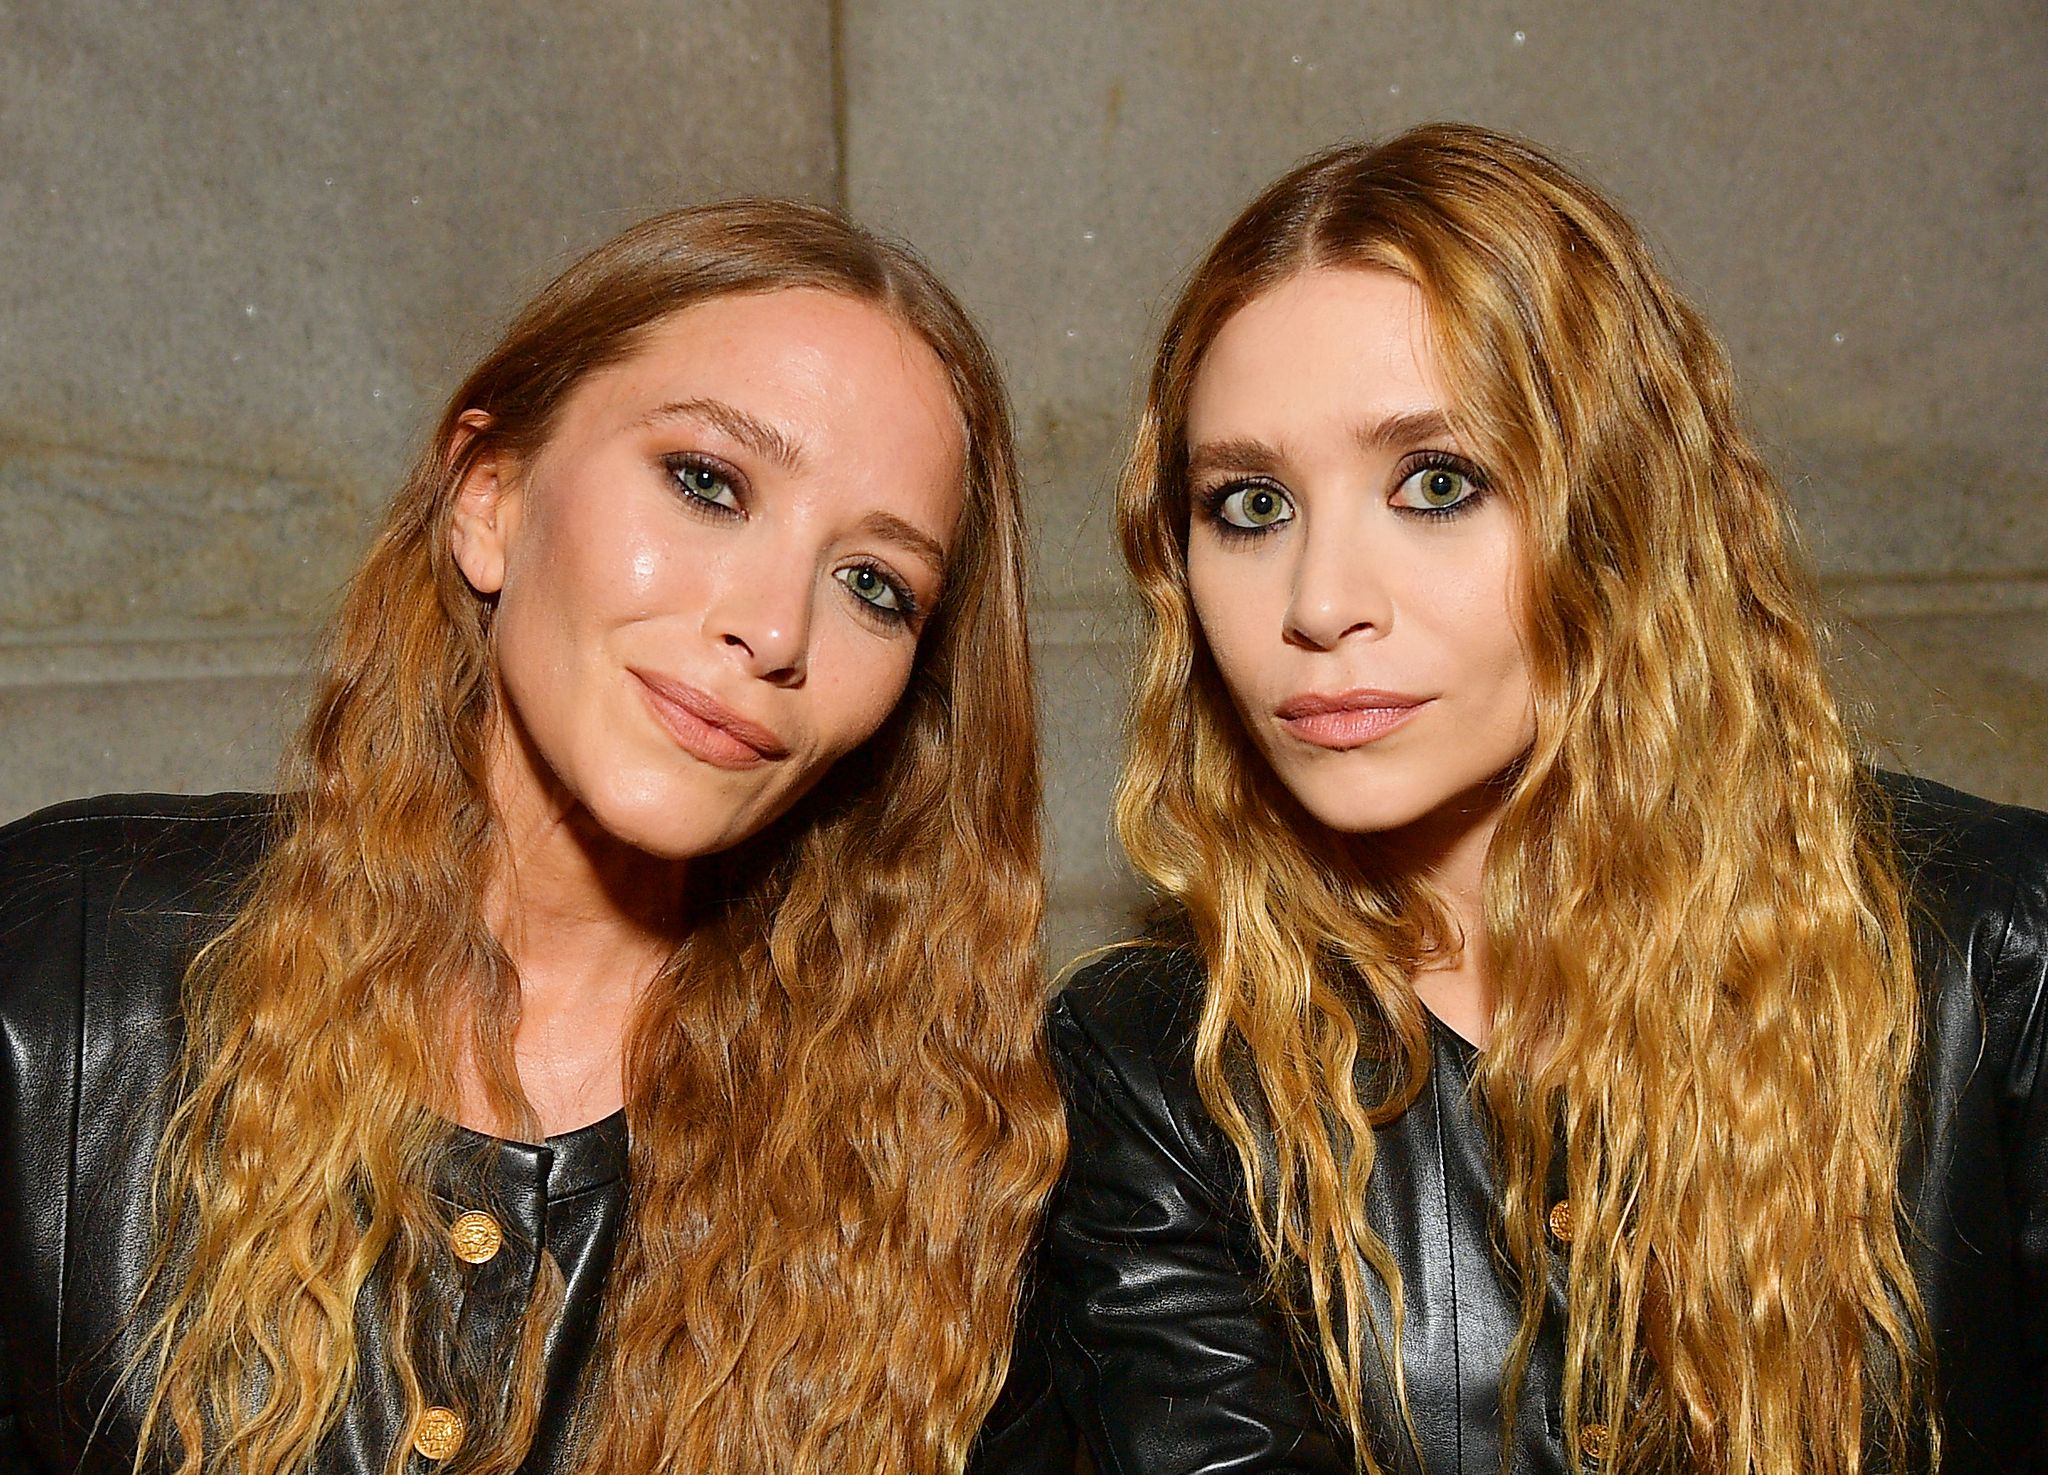 Look of the Week: An Olsen twin in color!